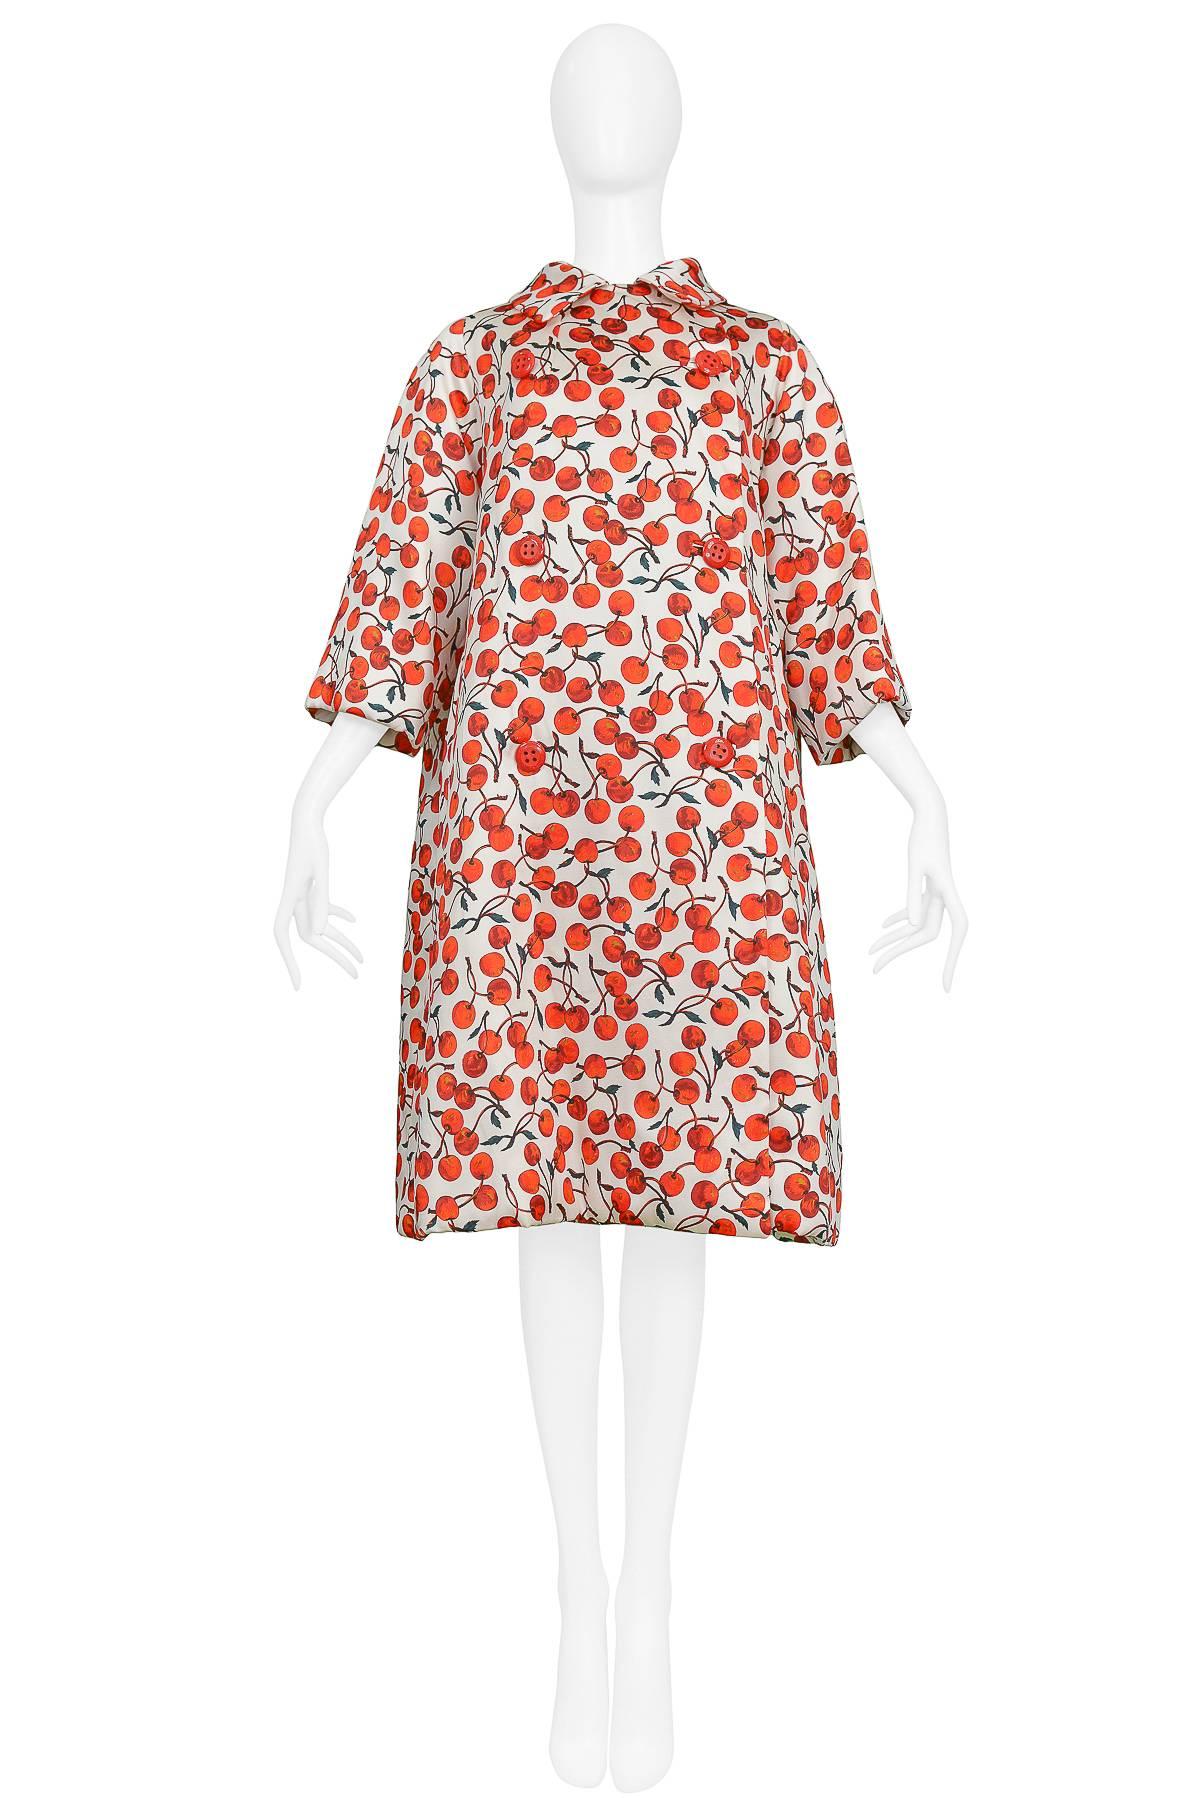 Iconic red and white cherry print Dolce & Gabbana swing style padded evening coat with red buttons. Collection 1996.